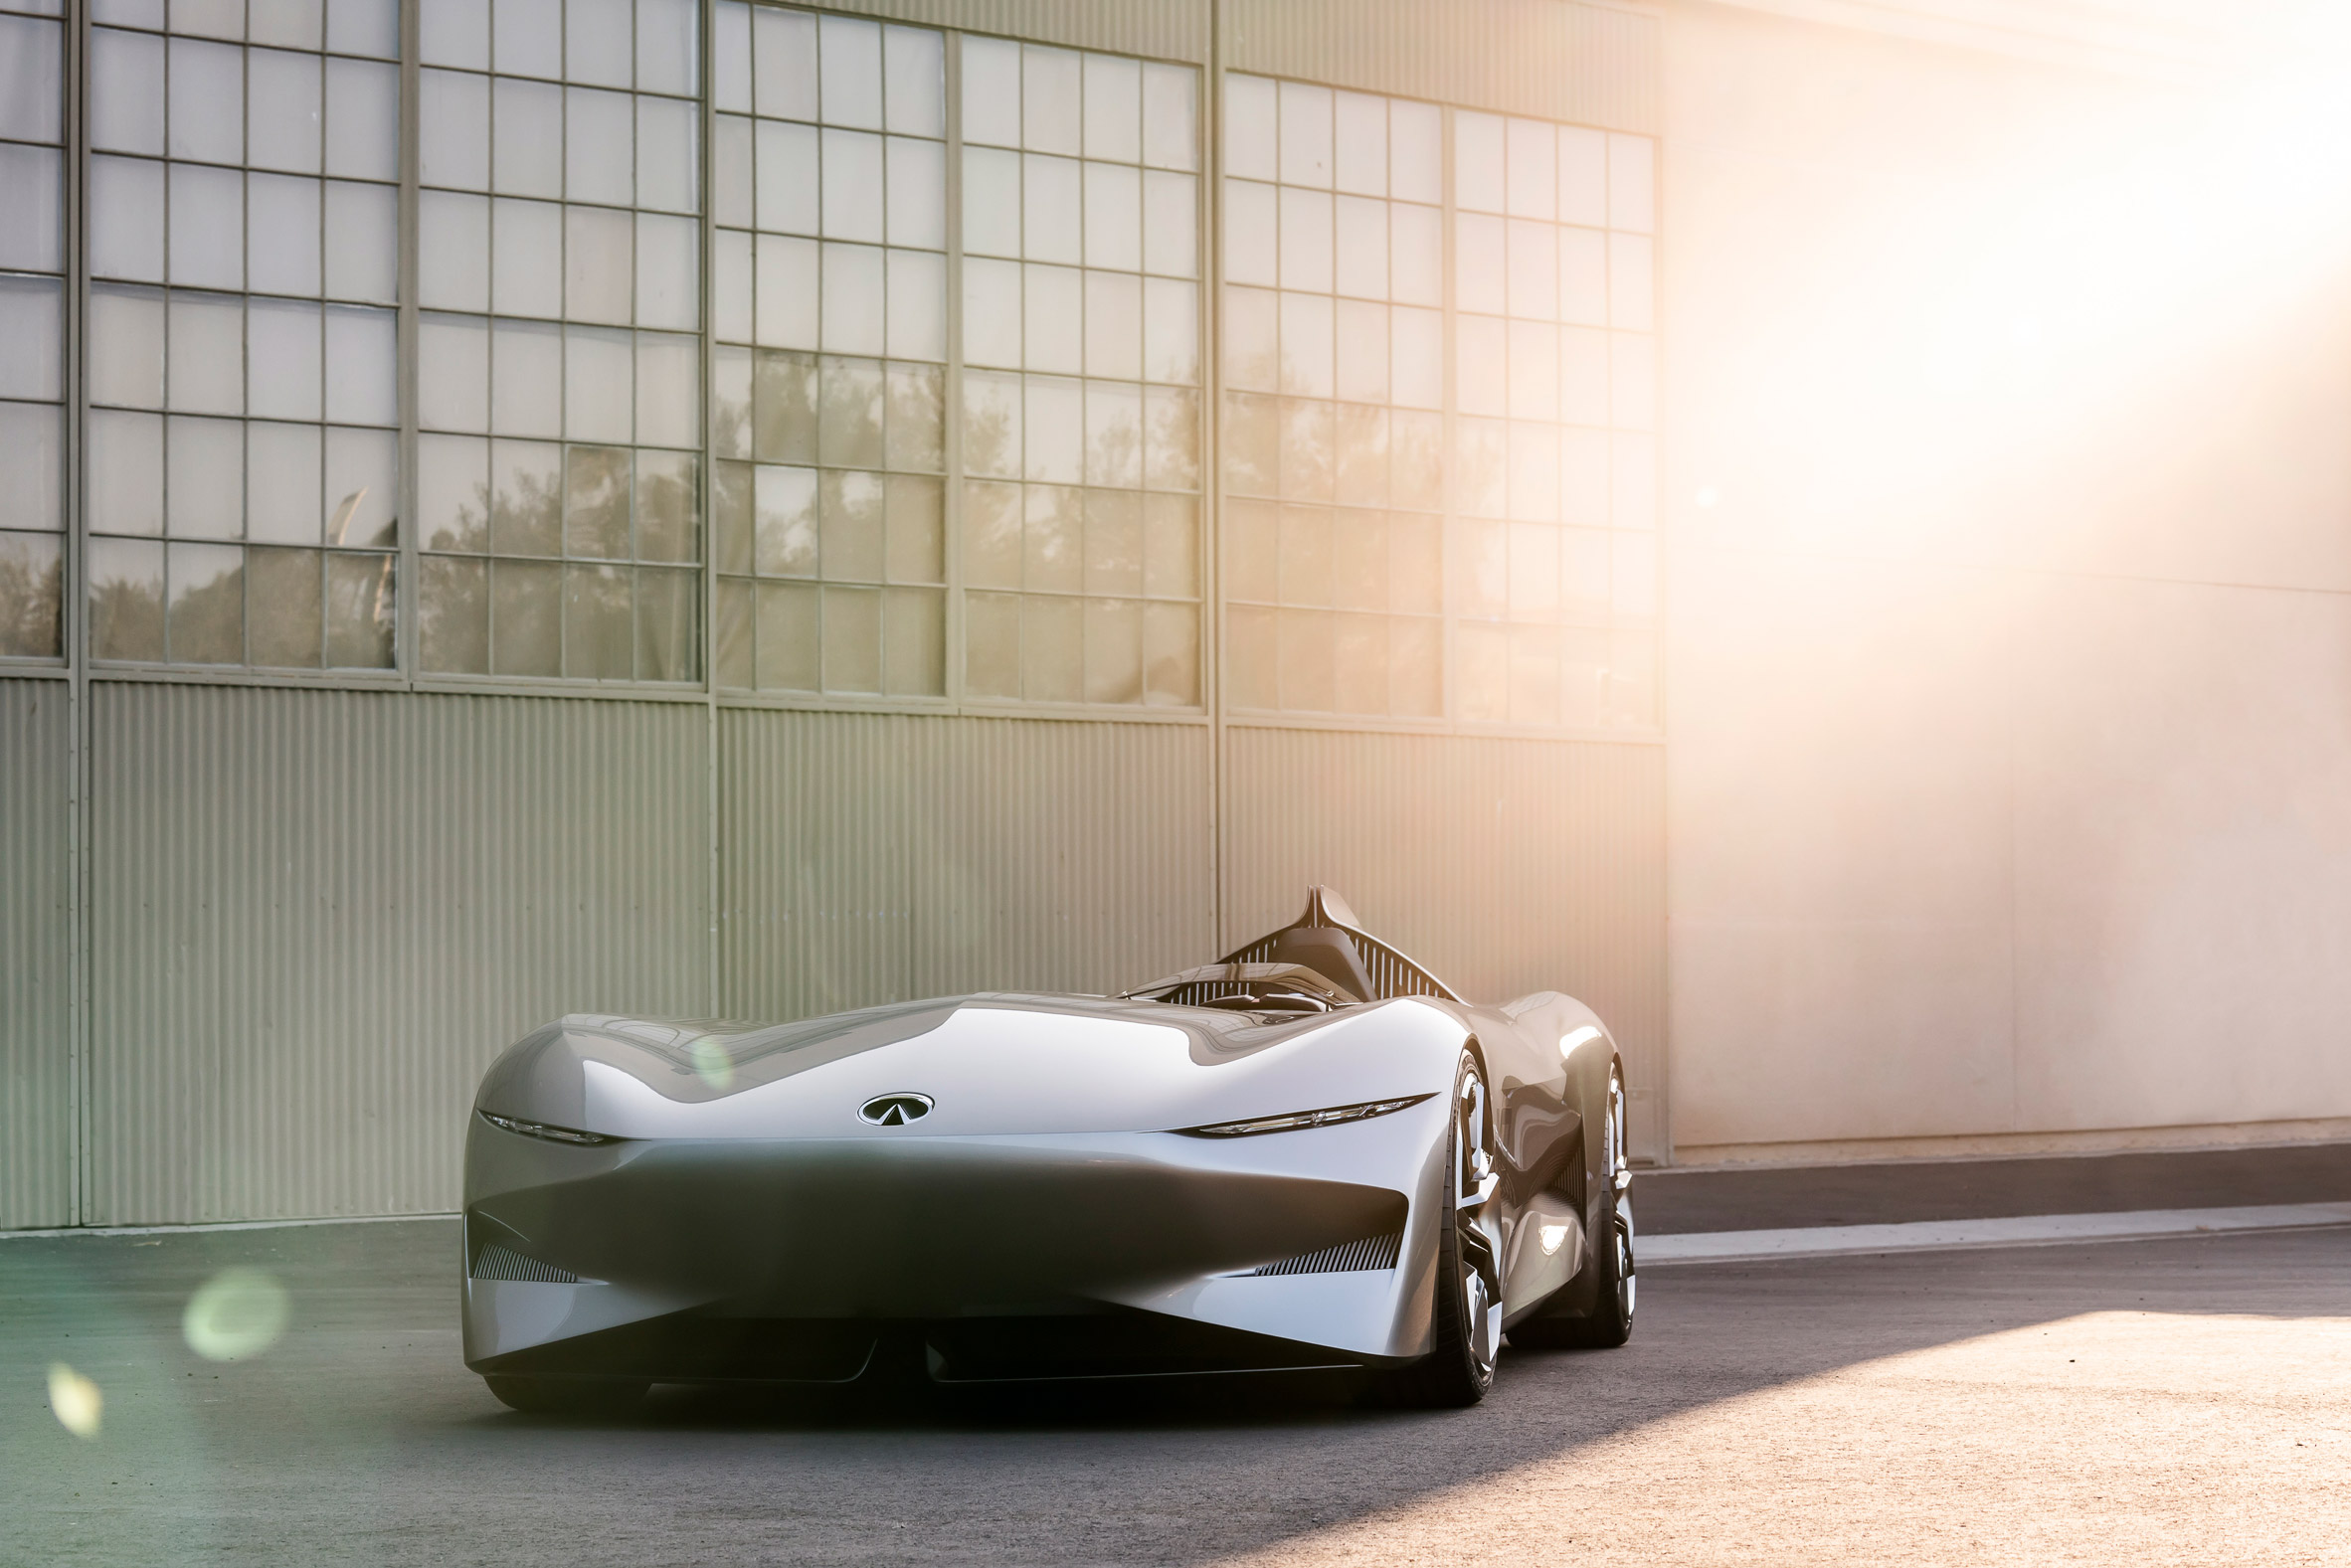 Infiniti's Prototype 10 concept is a modern take on the classic speedster